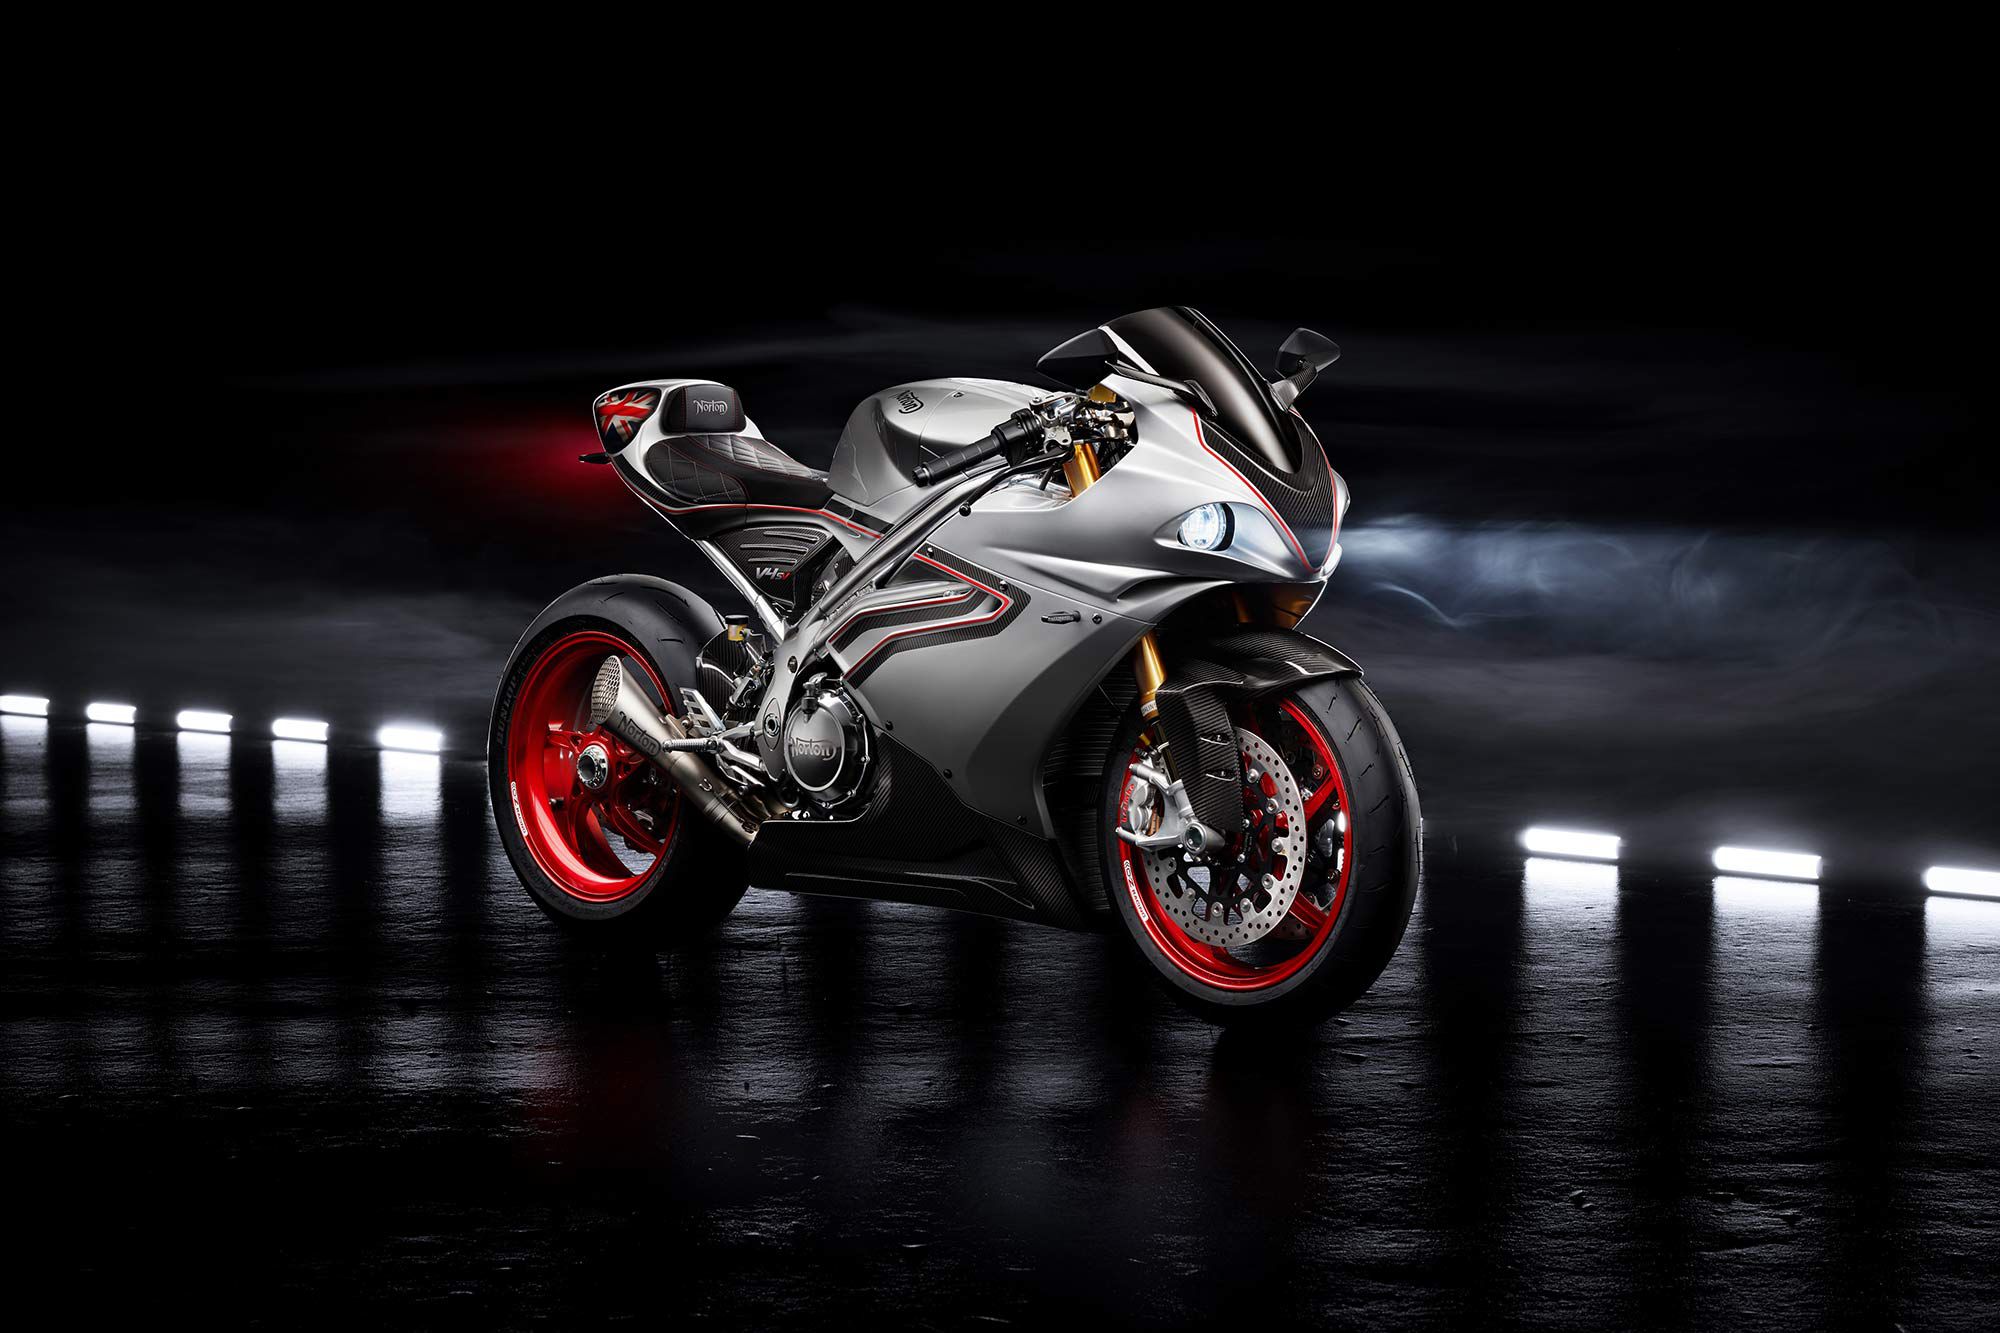 Norton is proclaiming the forthcoming V4SV to be “the most luxurious British superbike ever created.”